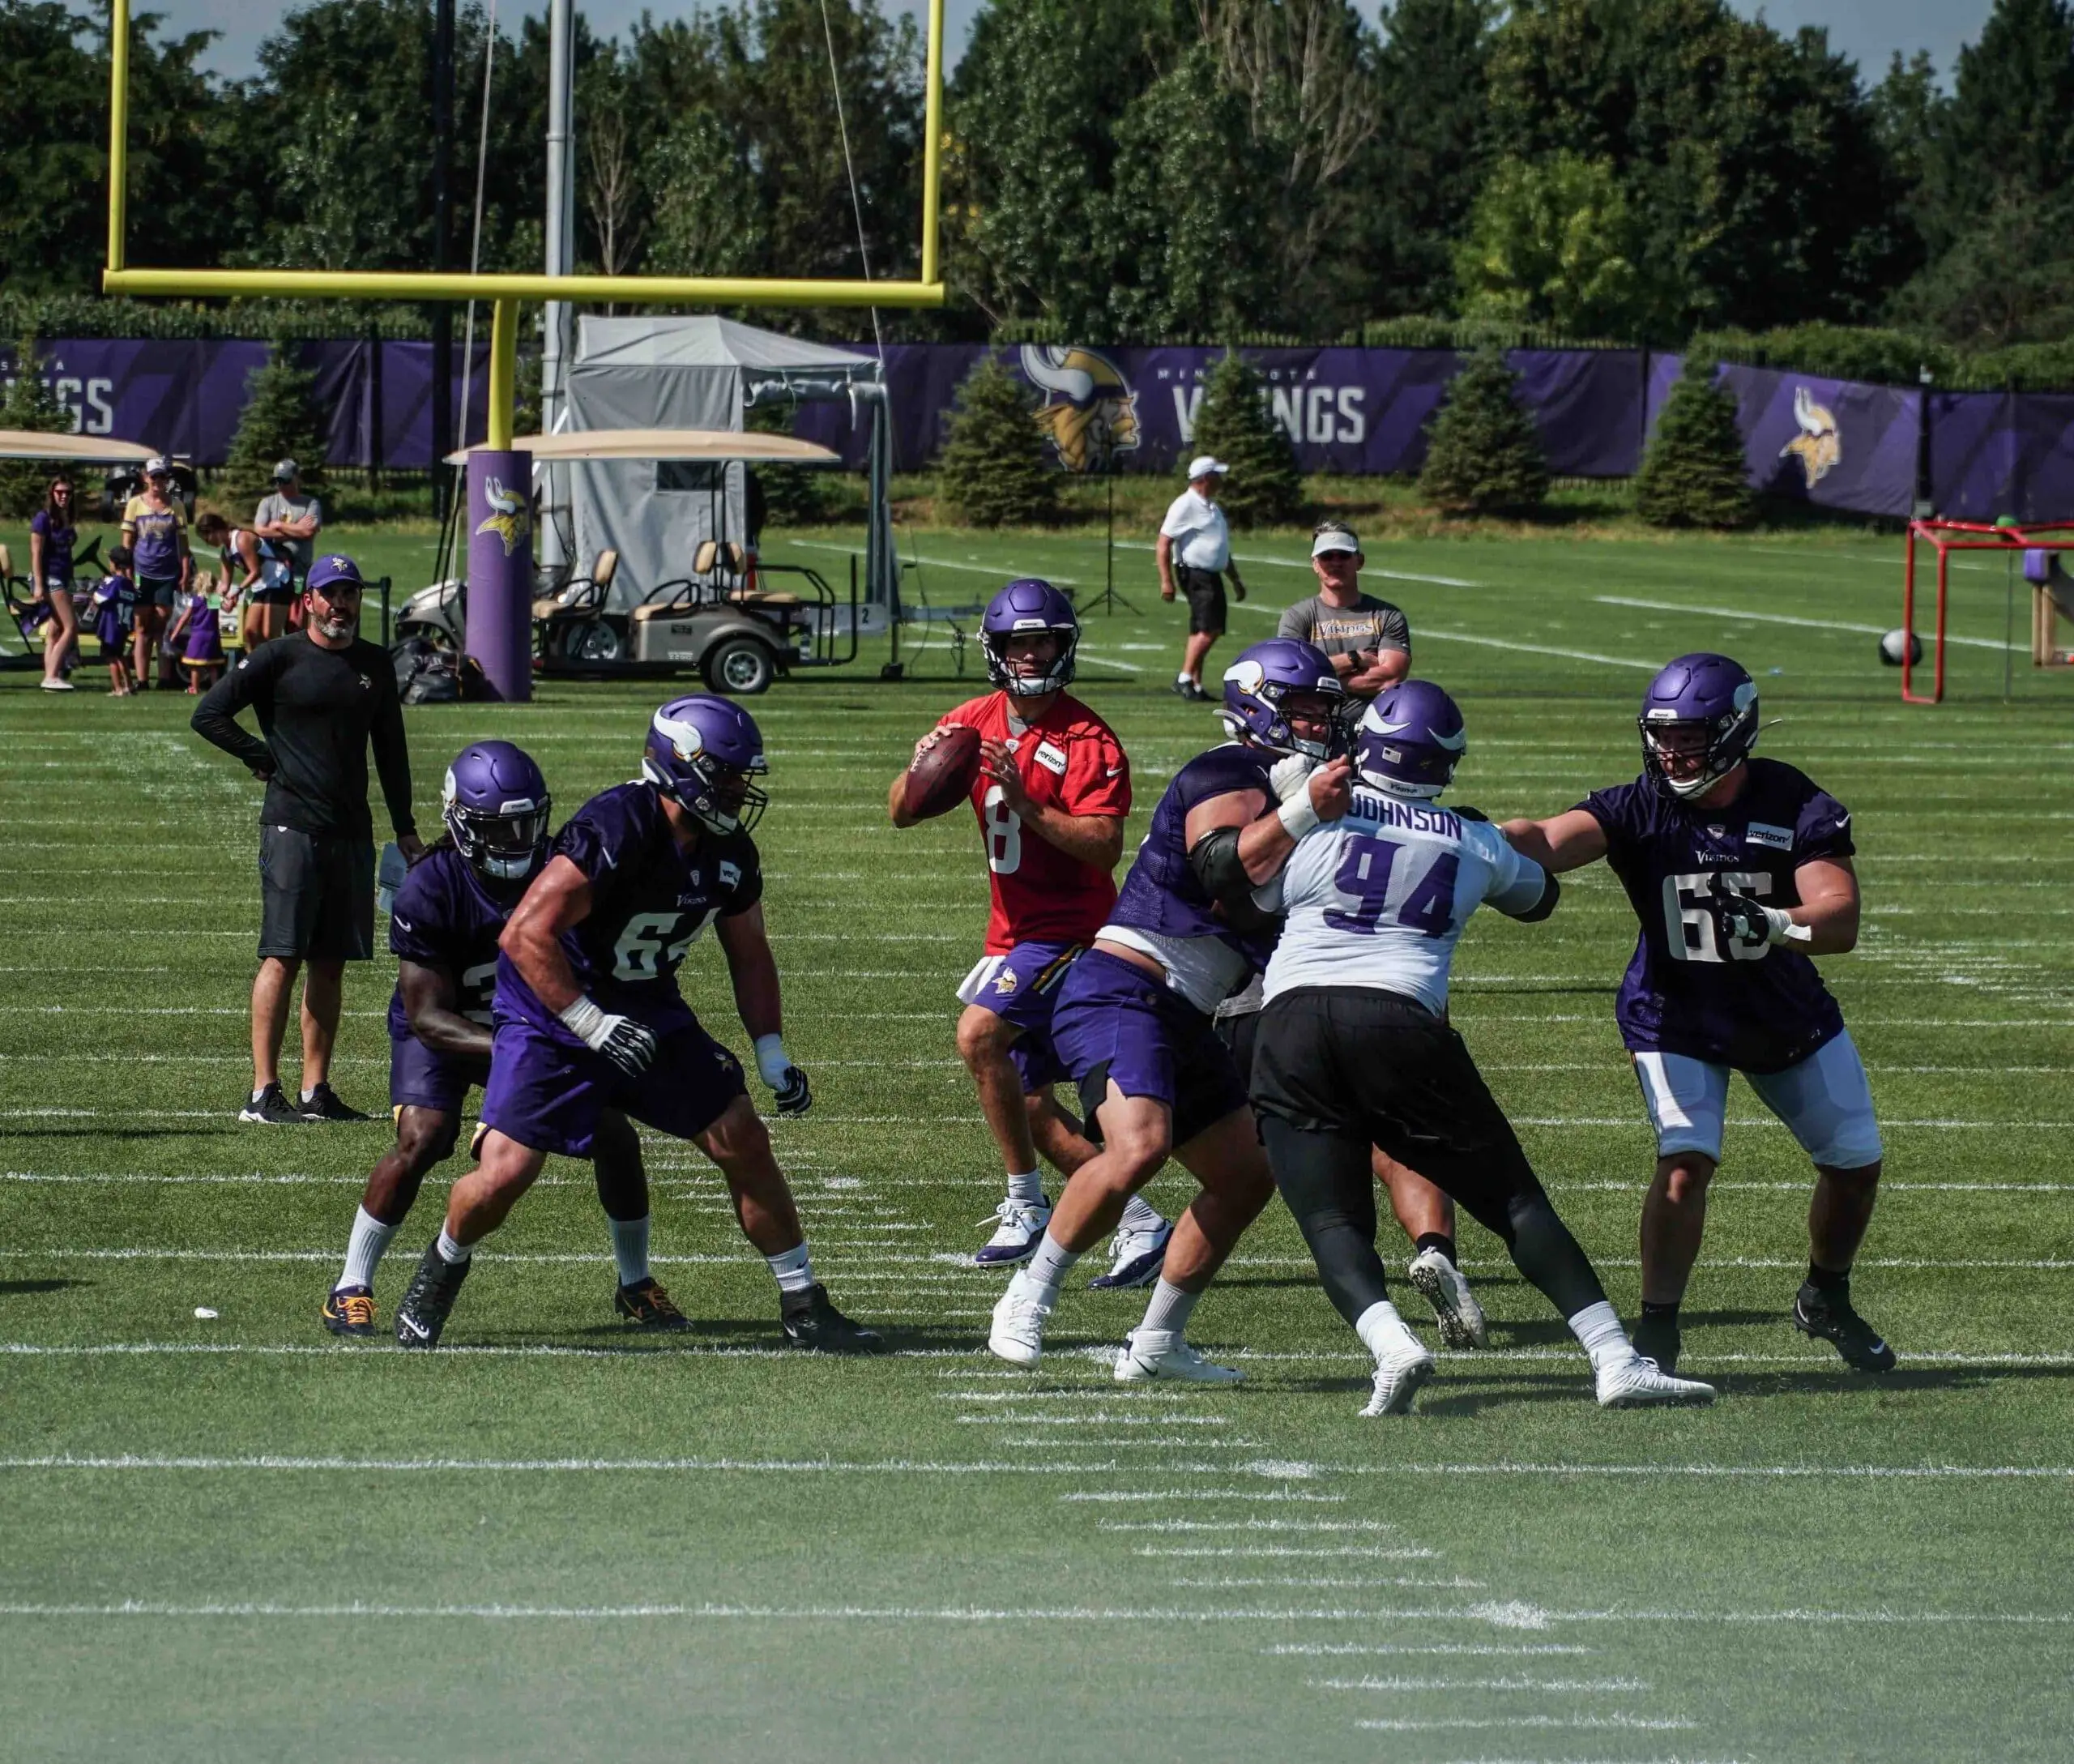 Nfl inside training camp live coverage expands starting monday august 17 scaled